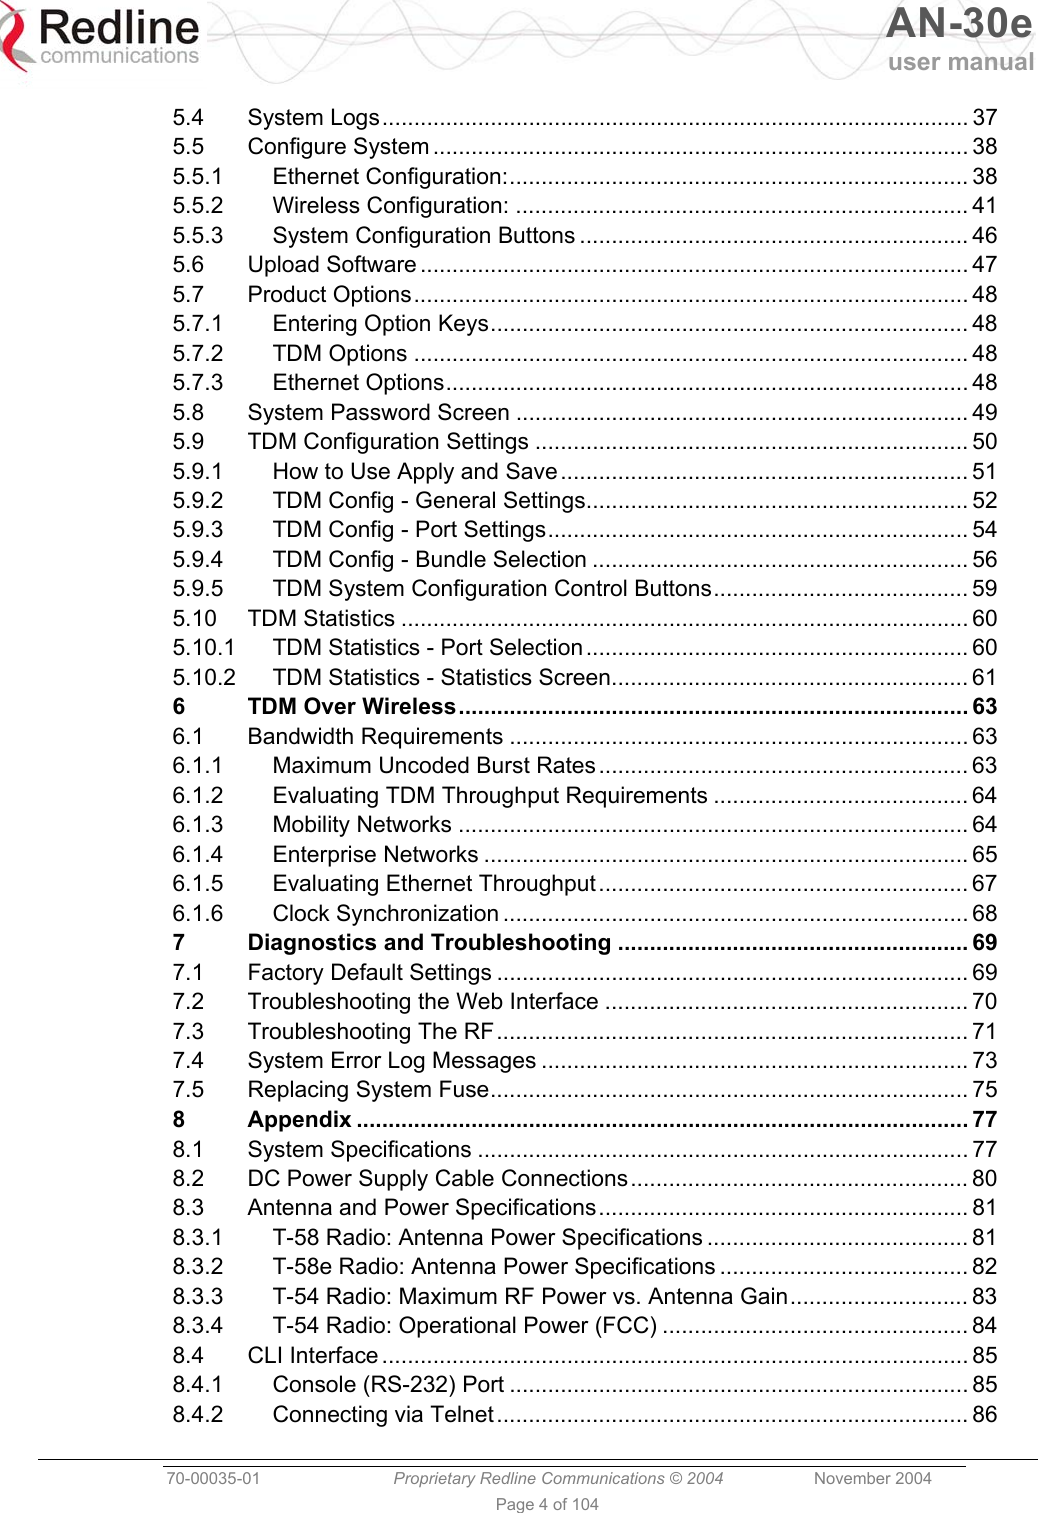   AN-30e user manual  70-00035-01  Proprietary Redline Communications © 2004 November 2004   Page 4 of 104 5.4 System Logs............................................................................................ 37 5.5 Configure System .................................................................................... 38 5.5.1 Ethernet Configuration:........................................................................ 38 5.5.2 Wireless Configuration: ....................................................................... 41 5.5.3 System Configuration Buttons ............................................................. 46 5.6 Upload Software ...................................................................................... 47 5.7 Product Options....................................................................................... 48 5.7.1 Entering Option Keys........................................................................... 48 5.7.2 TDM Options ....................................................................................... 48 5.7.3 Ethernet Options.................................................................................. 48 5.8 System Password Screen ....................................................................... 49 5.9 TDM Configuration Settings .................................................................... 50 5.9.1 How to Use Apply and Save................................................................ 51 5.9.2 TDM Config - General Settings............................................................ 52 5.9.3 TDM Config - Port Settings.................................................................. 54 5.9.4 TDM Config - Bundle Selection ........................................................... 56 5.9.5 TDM System Configuration Control Buttons........................................ 59 5.10 TDM Statistics ......................................................................................... 60 5.10.1 TDM Statistics - Port Selection............................................................ 60 5.10.2 TDM Statistics - Statistics Screen........................................................ 61 6 TDM Over Wireless................................................................................ 63 6.1 Bandwidth Requirements ........................................................................ 63 6.1.1 Maximum Uncoded Burst Rates .......................................................... 63 6.1.2 Evaluating TDM Throughput Requirements ........................................ 64 6.1.3 Mobility Networks ................................................................................ 64 6.1.4 Enterprise Networks ............................................................................ 65 6.1.5 Evaluating Ethernet Throughput.......................................................... 67 6.1.6 Clock Synchronization ......................................................................... 68 7 Diagnostics and Troubleshooting ....................................................... 69 7.1 Factory Default Settings .......................................................................... 69 7.2 Troubleshooting the Web Interface ......................................................... 70 7.3 Troubleshooting The RF.......................................................................... 71 7.4 System Error Log Messages ................................................................... 73 7.5 Replacing System Fuse........................................................................... 75 8 Appendix ................................................................................................ 77 8.1 System Specifications ............................................................................. 77 8.2 DC Power Supply Cable Connections..................................................... 80 8.3 Antenna and Power Specifications.......................................................... 81 8.3.1 T-58 Radio: Antenna Power Specifications ......................................... 81 8.3.2 T-58e Radio: Antenna Power Specifications ....................................... 82 8.3.3 T-54 Radio: Maximum RF Power vs. Antenna Gain............................ 83 8.3.4 T-54 Radio: Operational Power (FCC) ................................................ 84 8.4 CLI Interface ............................................................................................ 85 8.4.1 Console (RS-232) Port ........................................................................ 85 8.4.2 Connecting via Telnet.......................................................................... 86 